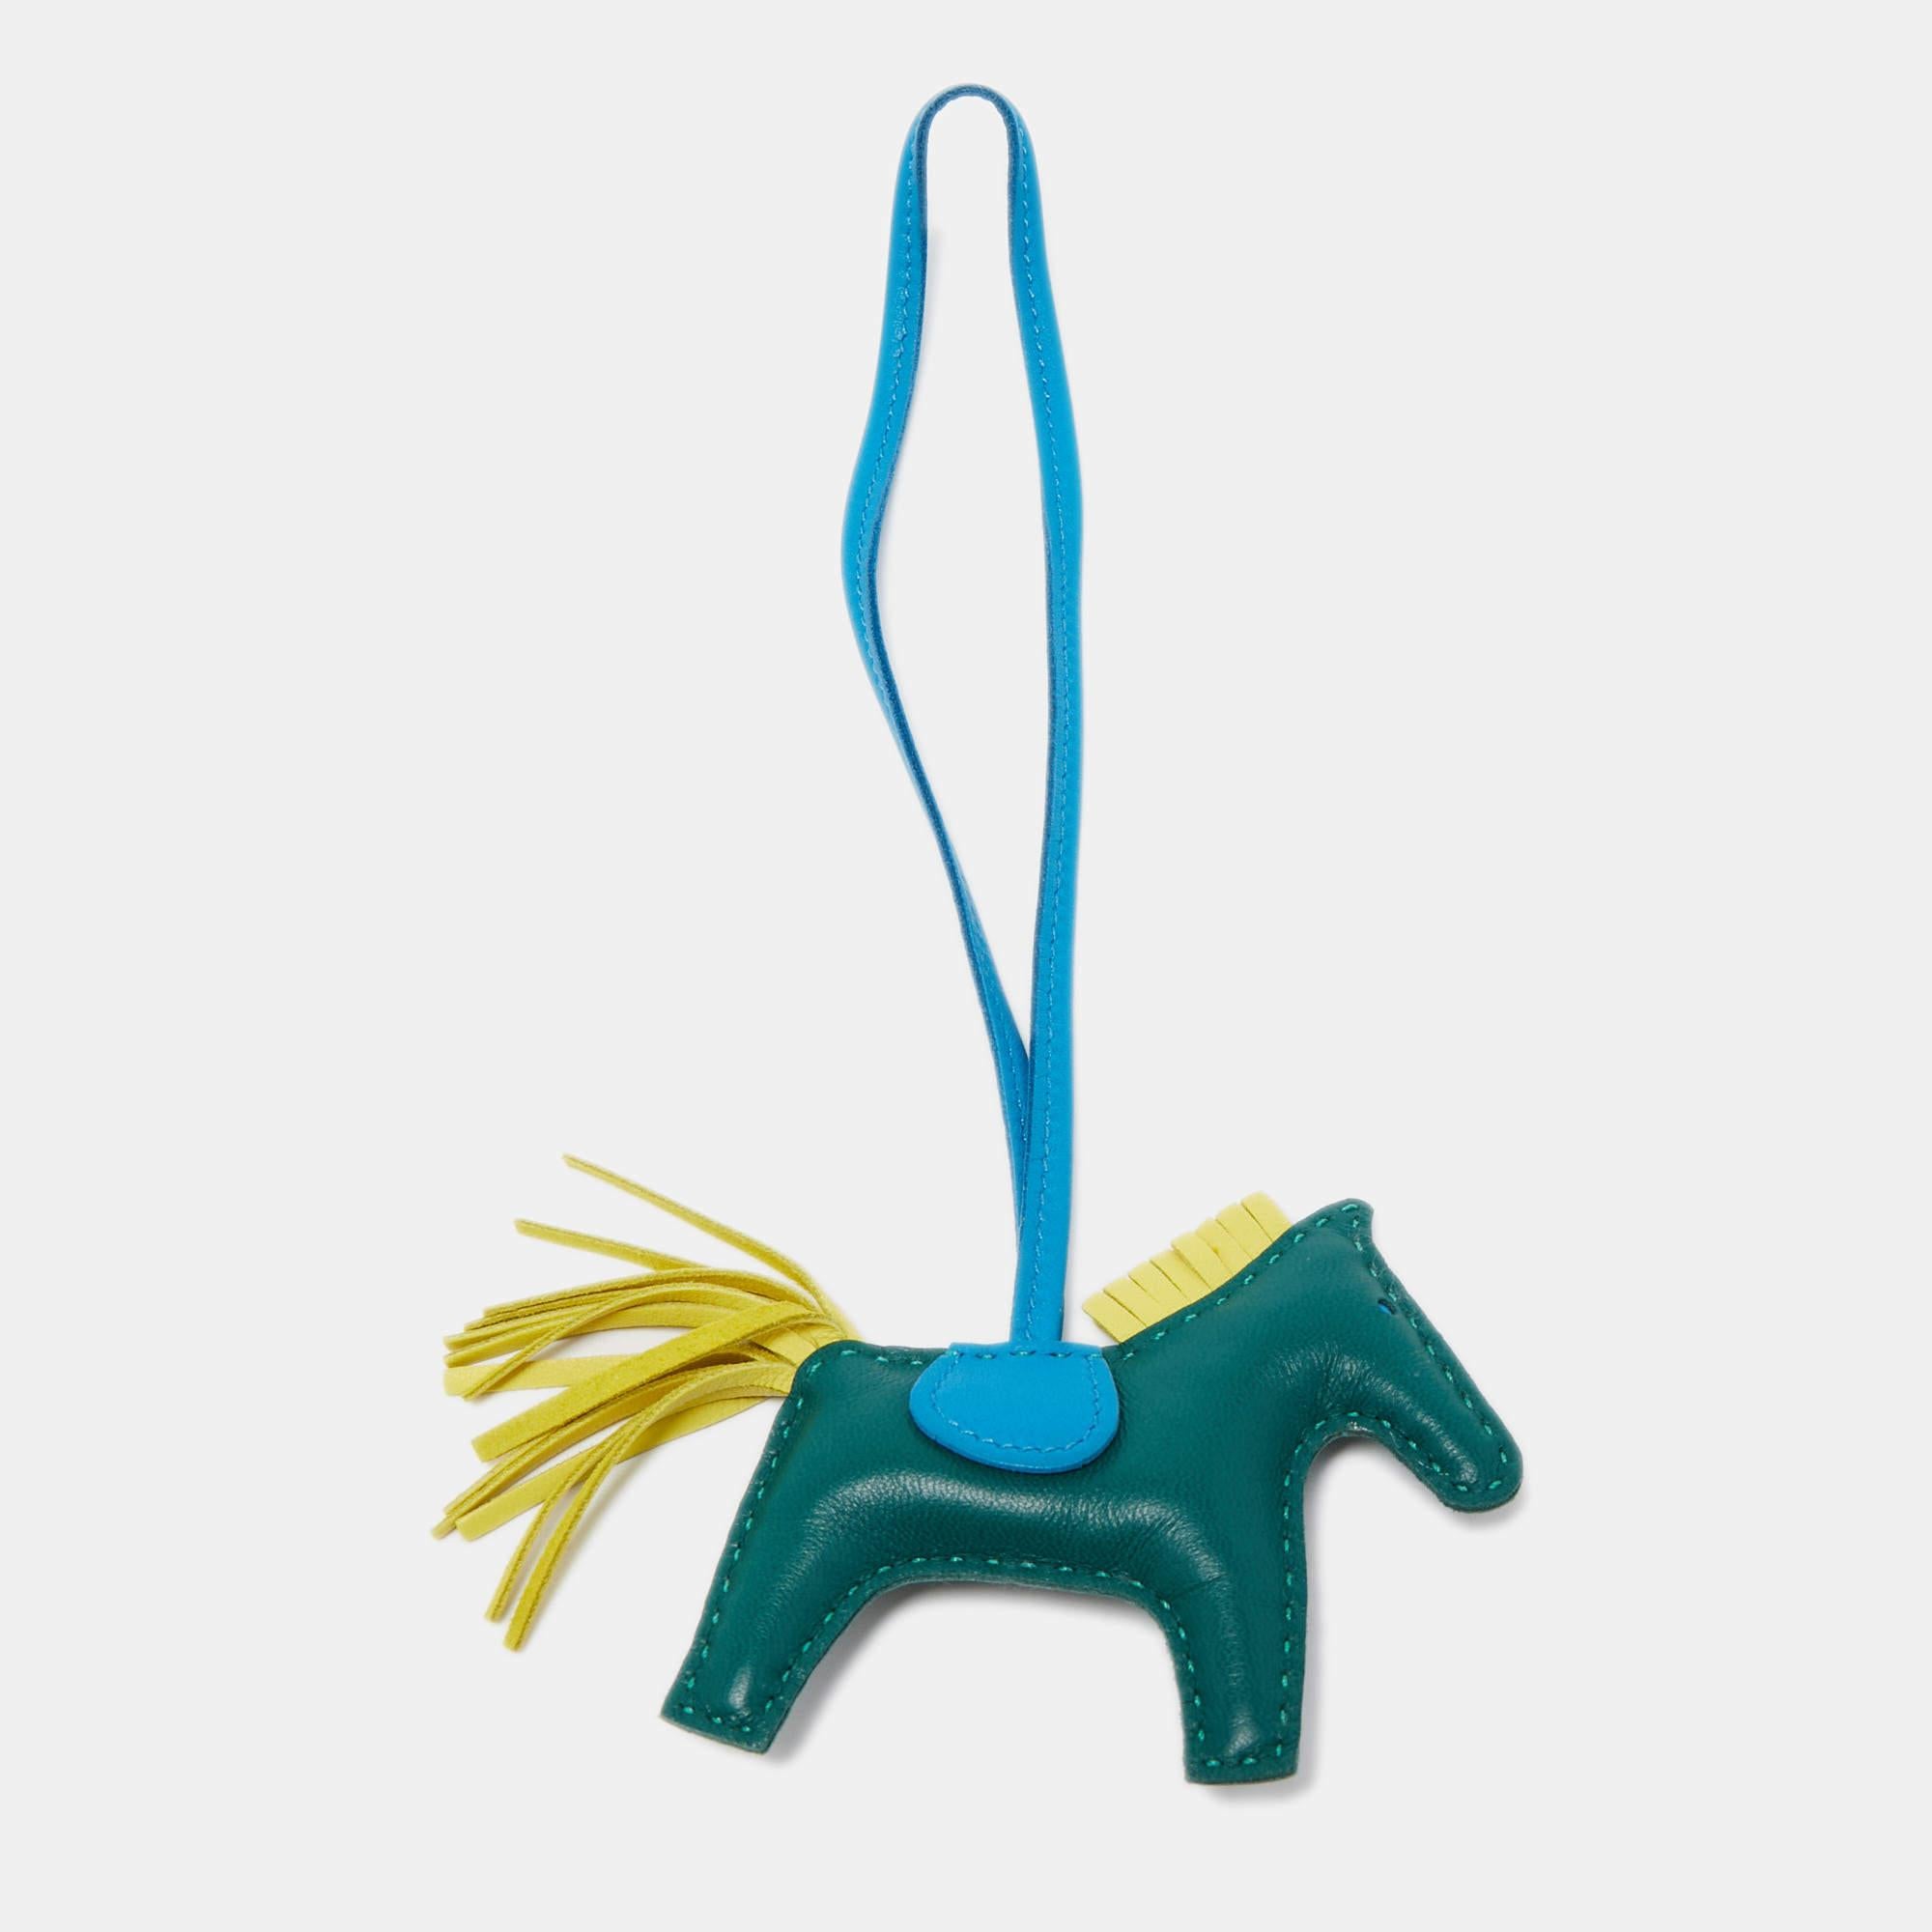 Rodeo bag charms by Hermès come close to being as rare as some of the brand's bags. Collected by fans of Hermès and handbags alike, these little galloping charms are dream pieces to dress up one's precious bags.

Includes: Original Box, Info